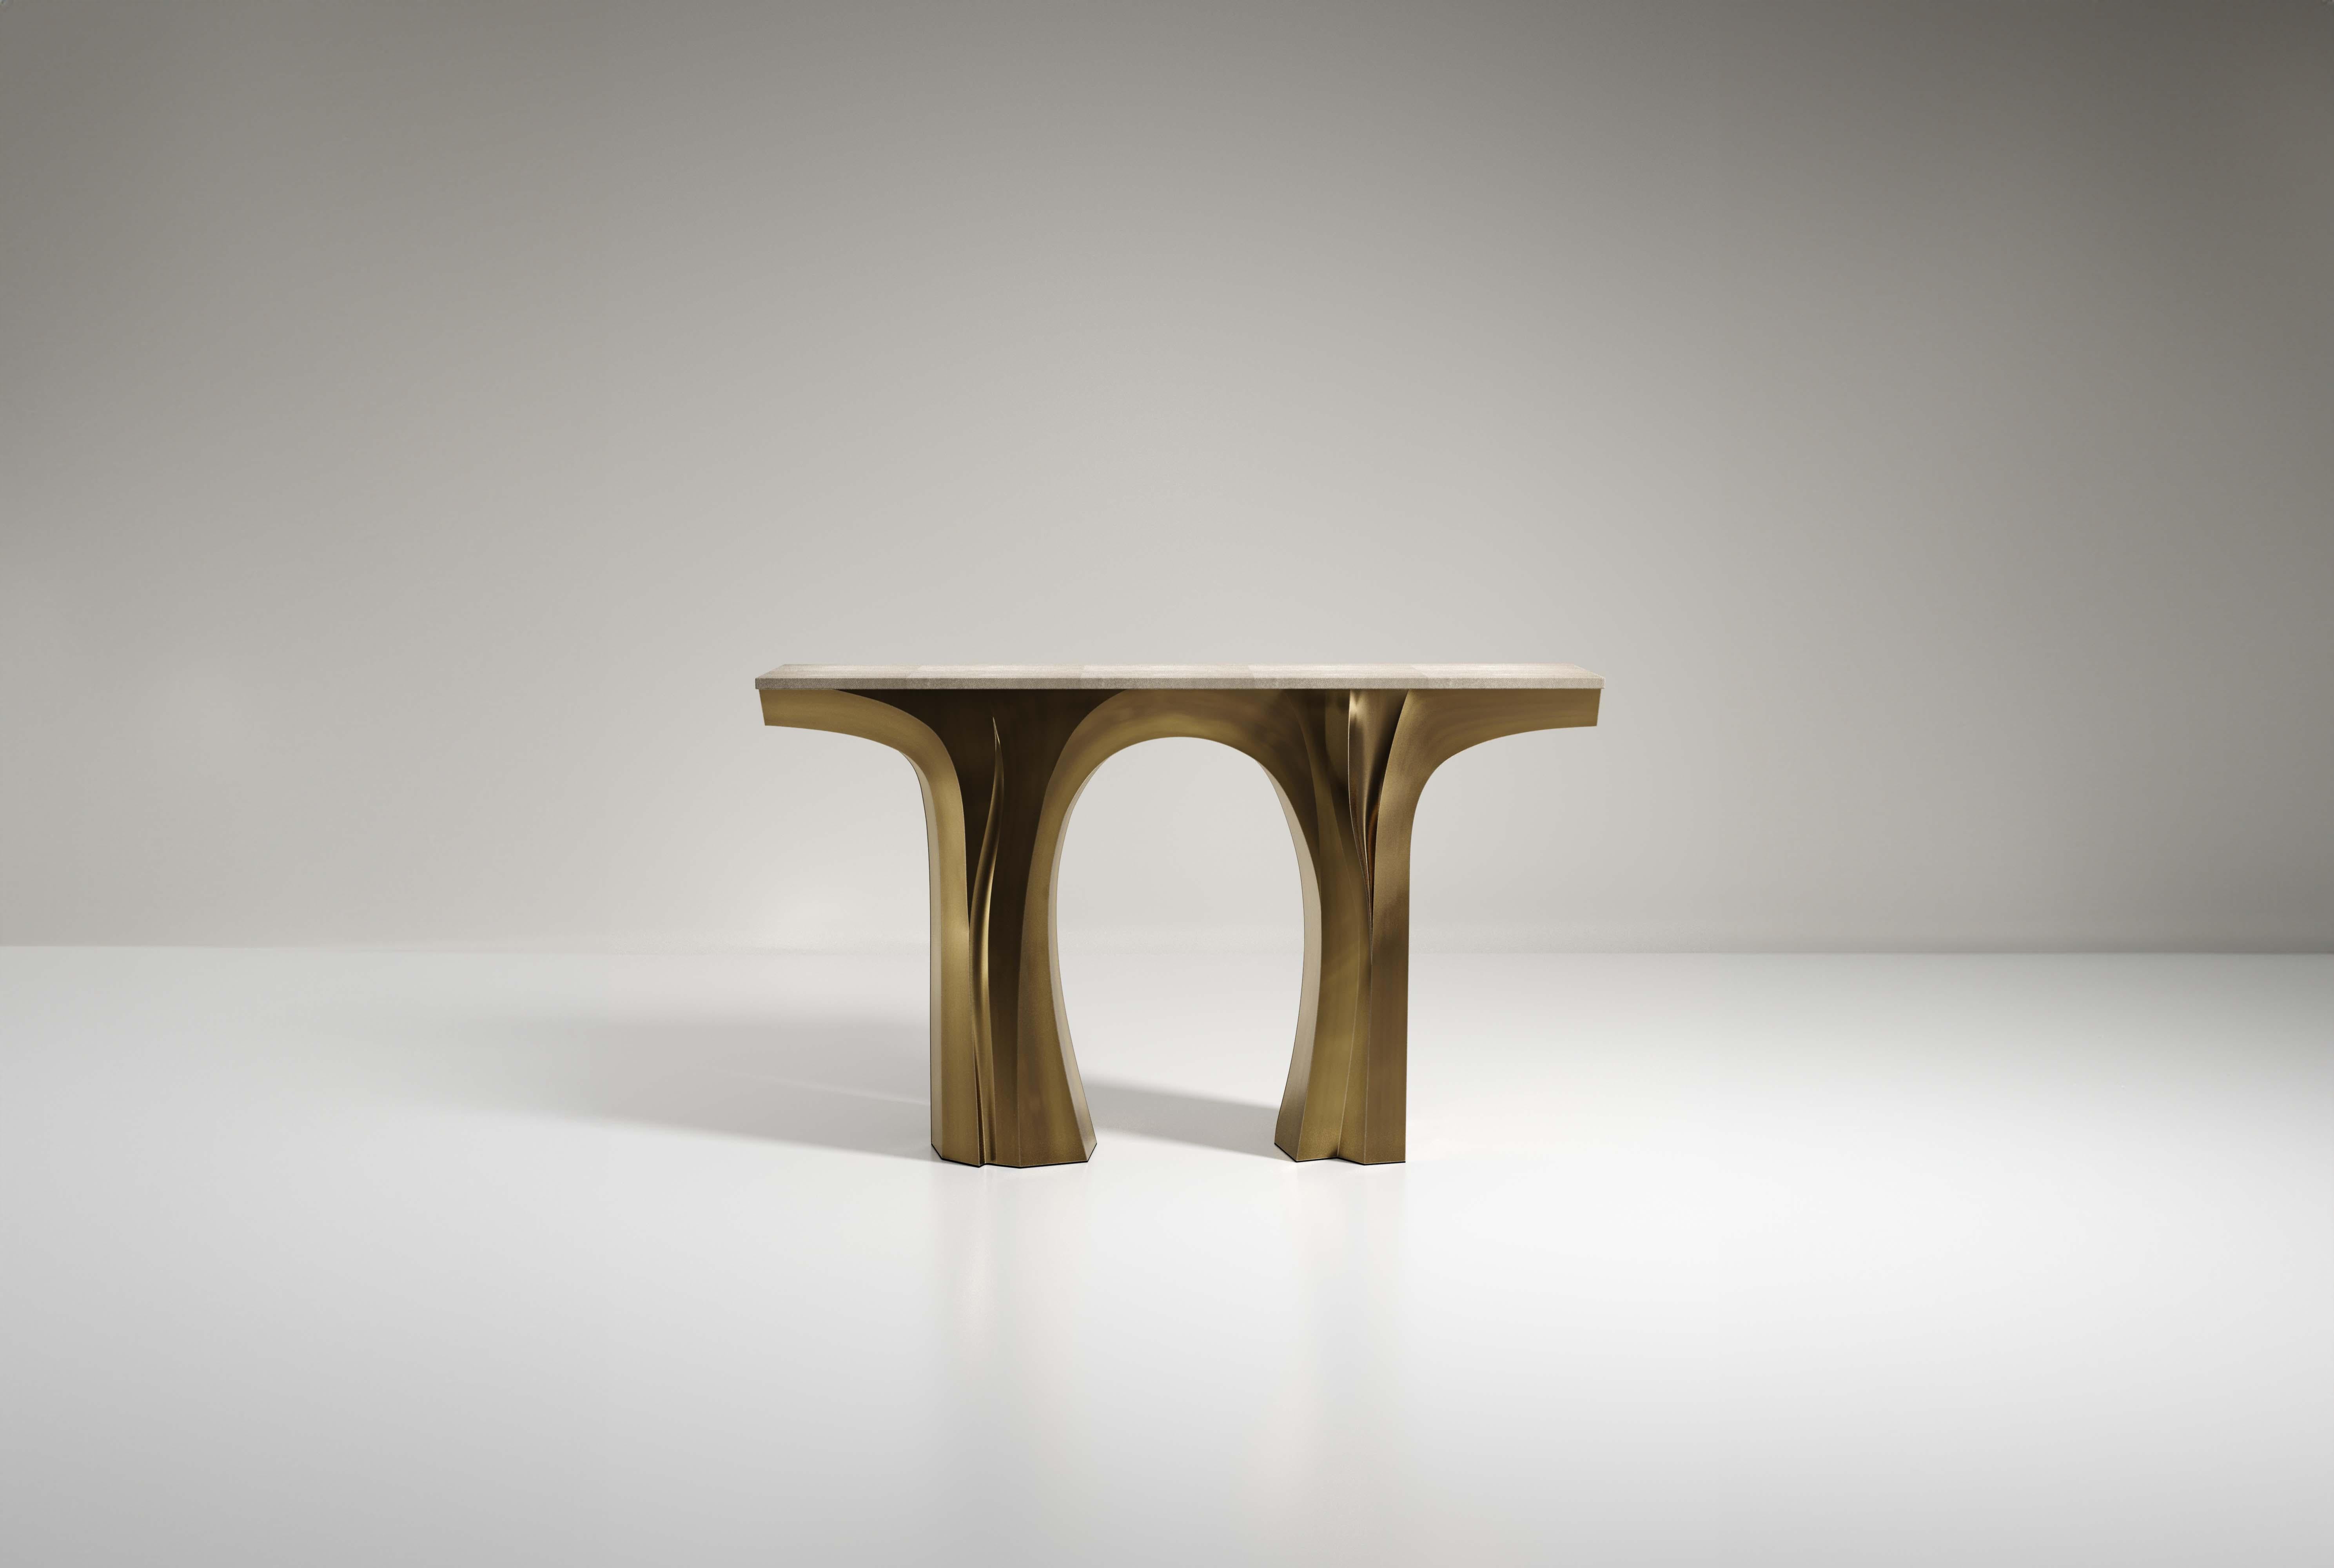 The Alma console by R&Y Augousti is a sculptural and versatile piece. The cream shagreen inlaid top morphs into dramatic hand-carved bronze-patina brass legs. The grooves and details on the base allow the console to have different expressions from